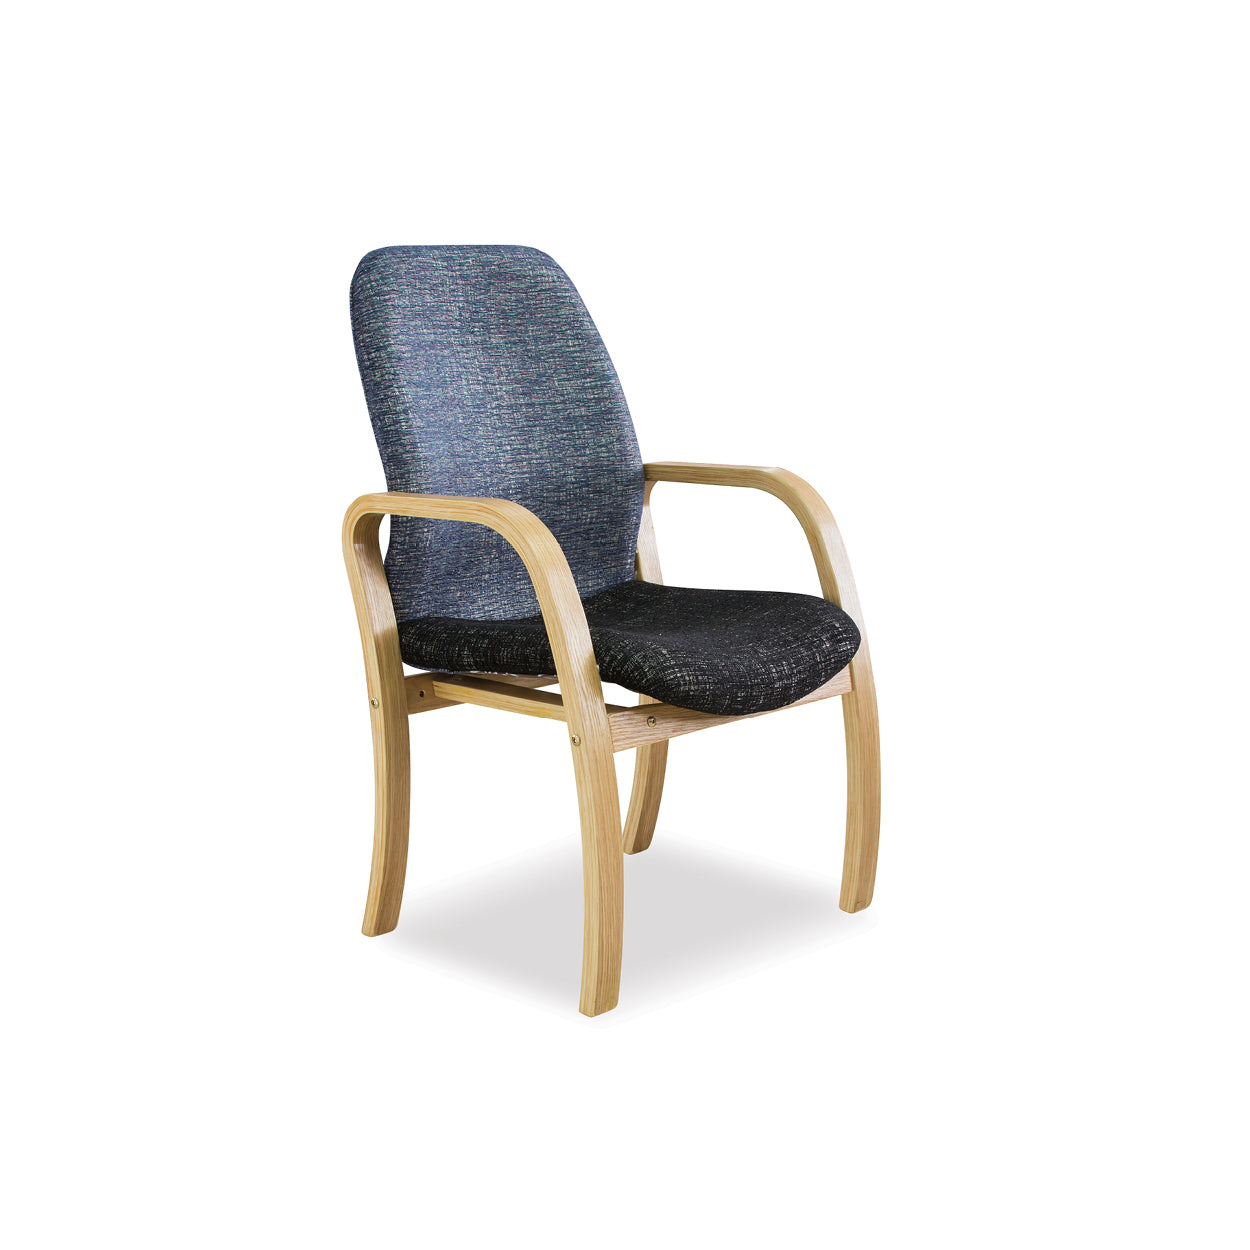 Hedcor Morant Wood Visitors chair